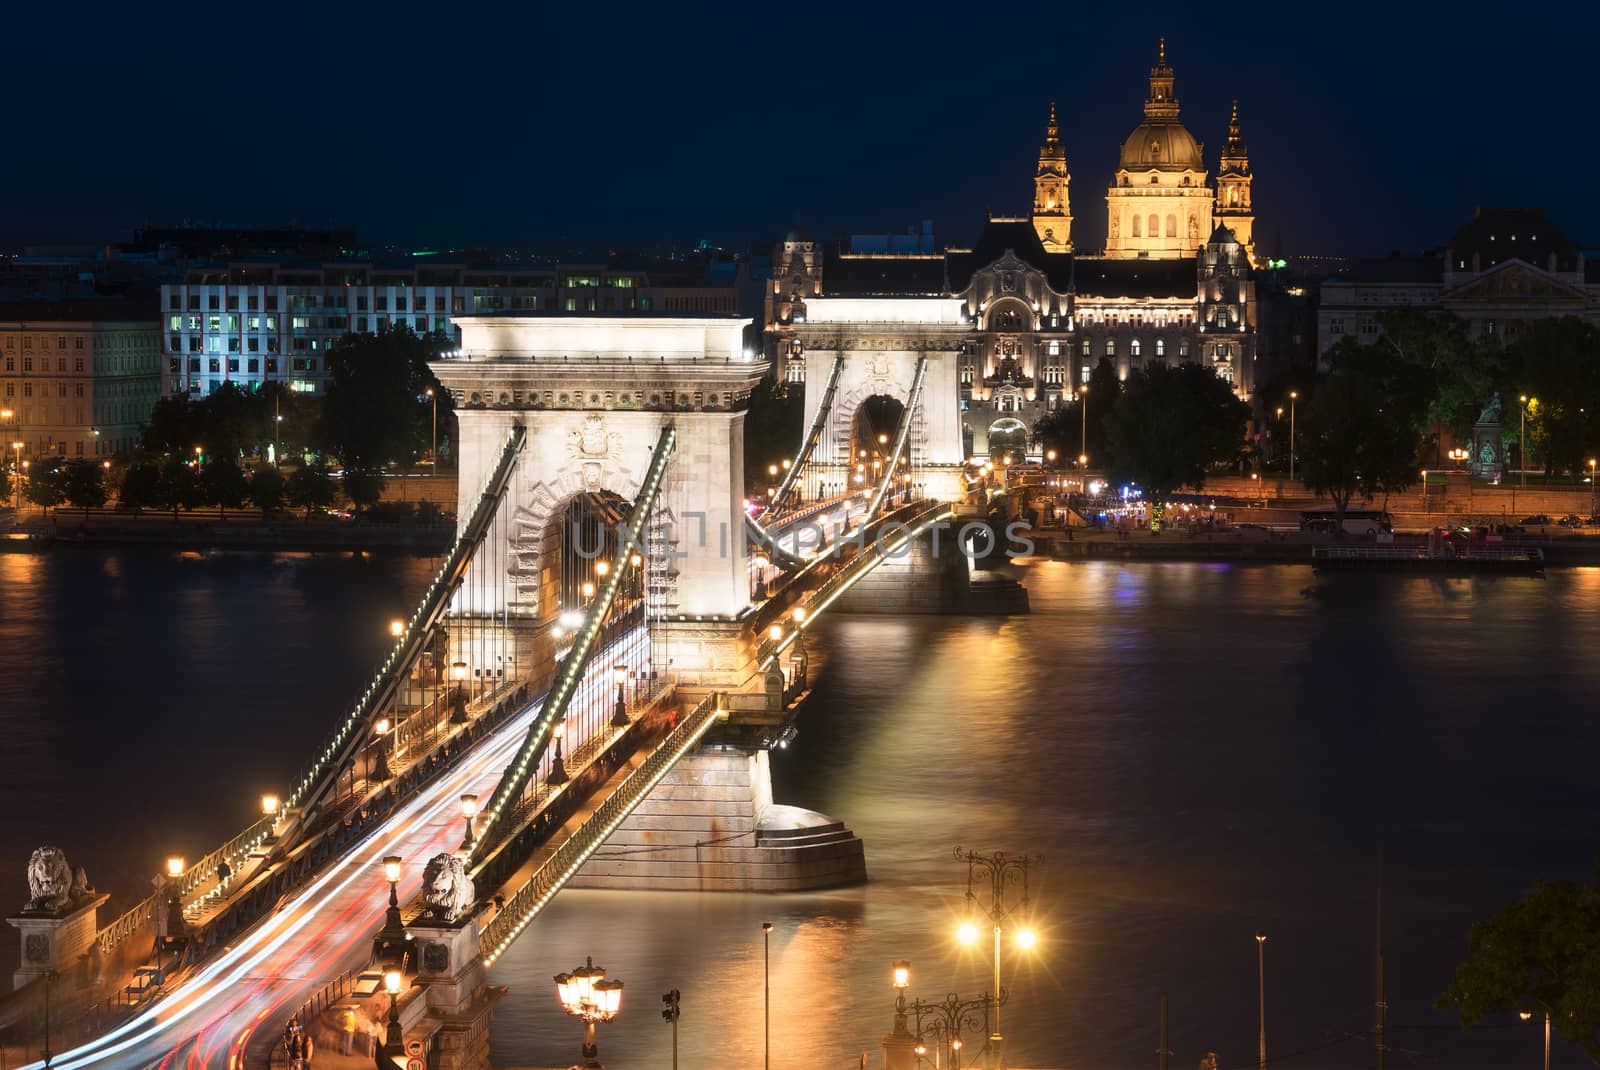 Szechenyi Bridge is connects Buda to Pest on the Danube river.